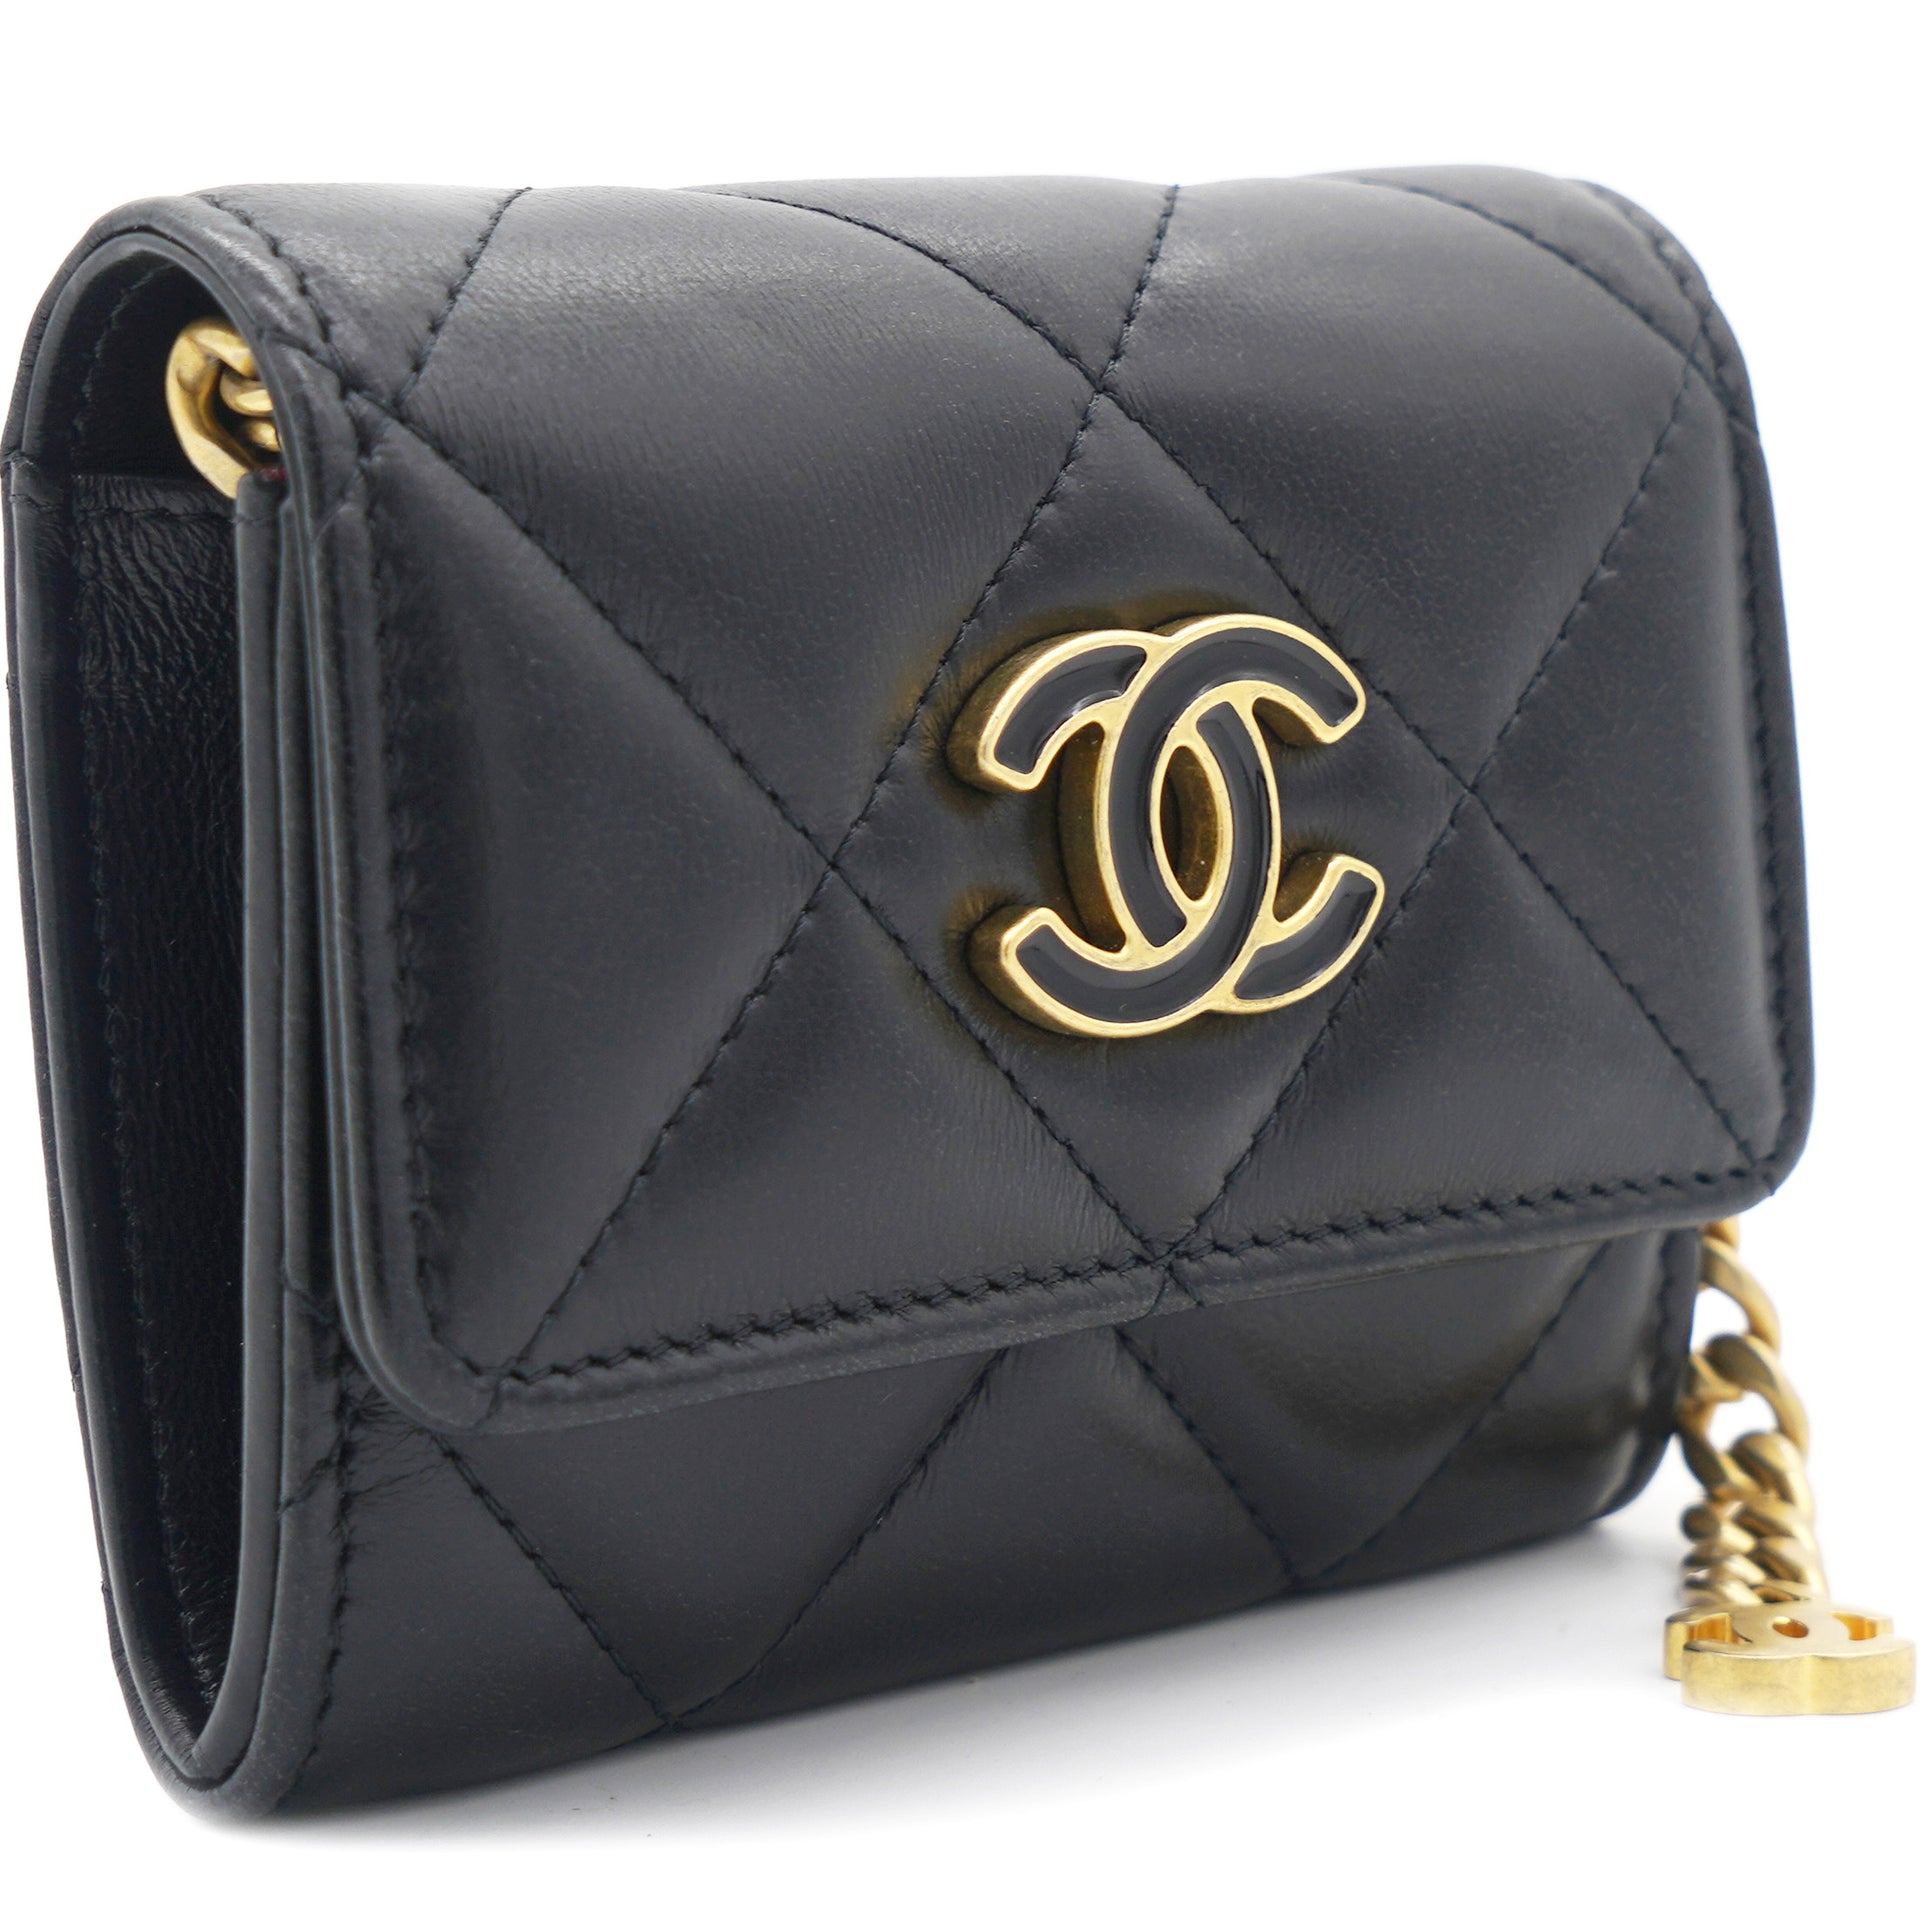 Chanel Black Quilted Lambskin Chanel 19 Mini Coin Purse With Chain Auction